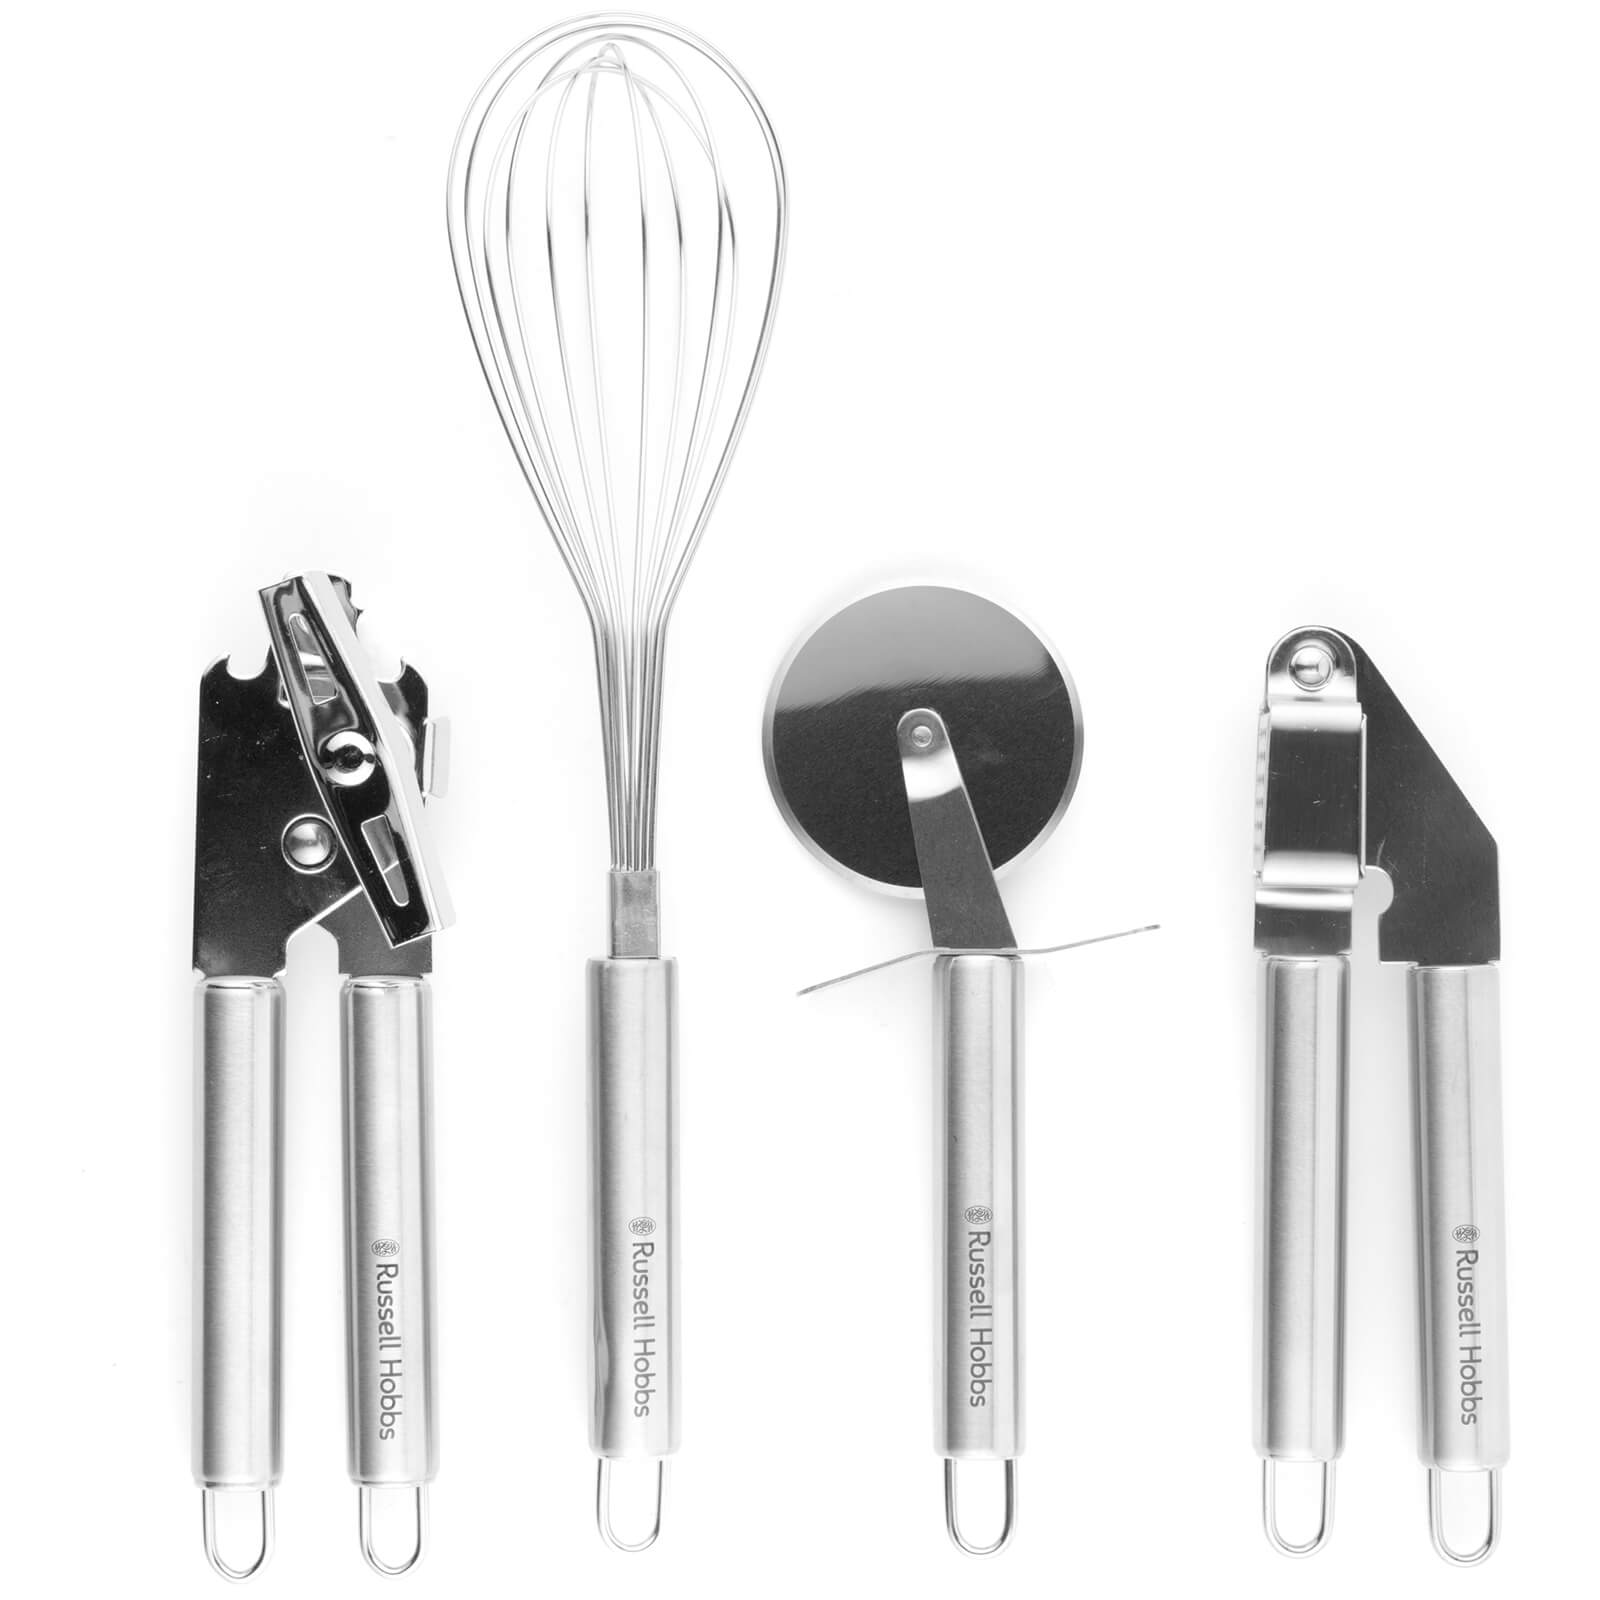 Russell Hobbs 4 Piece Stainless Steel Kitchen Tool Set